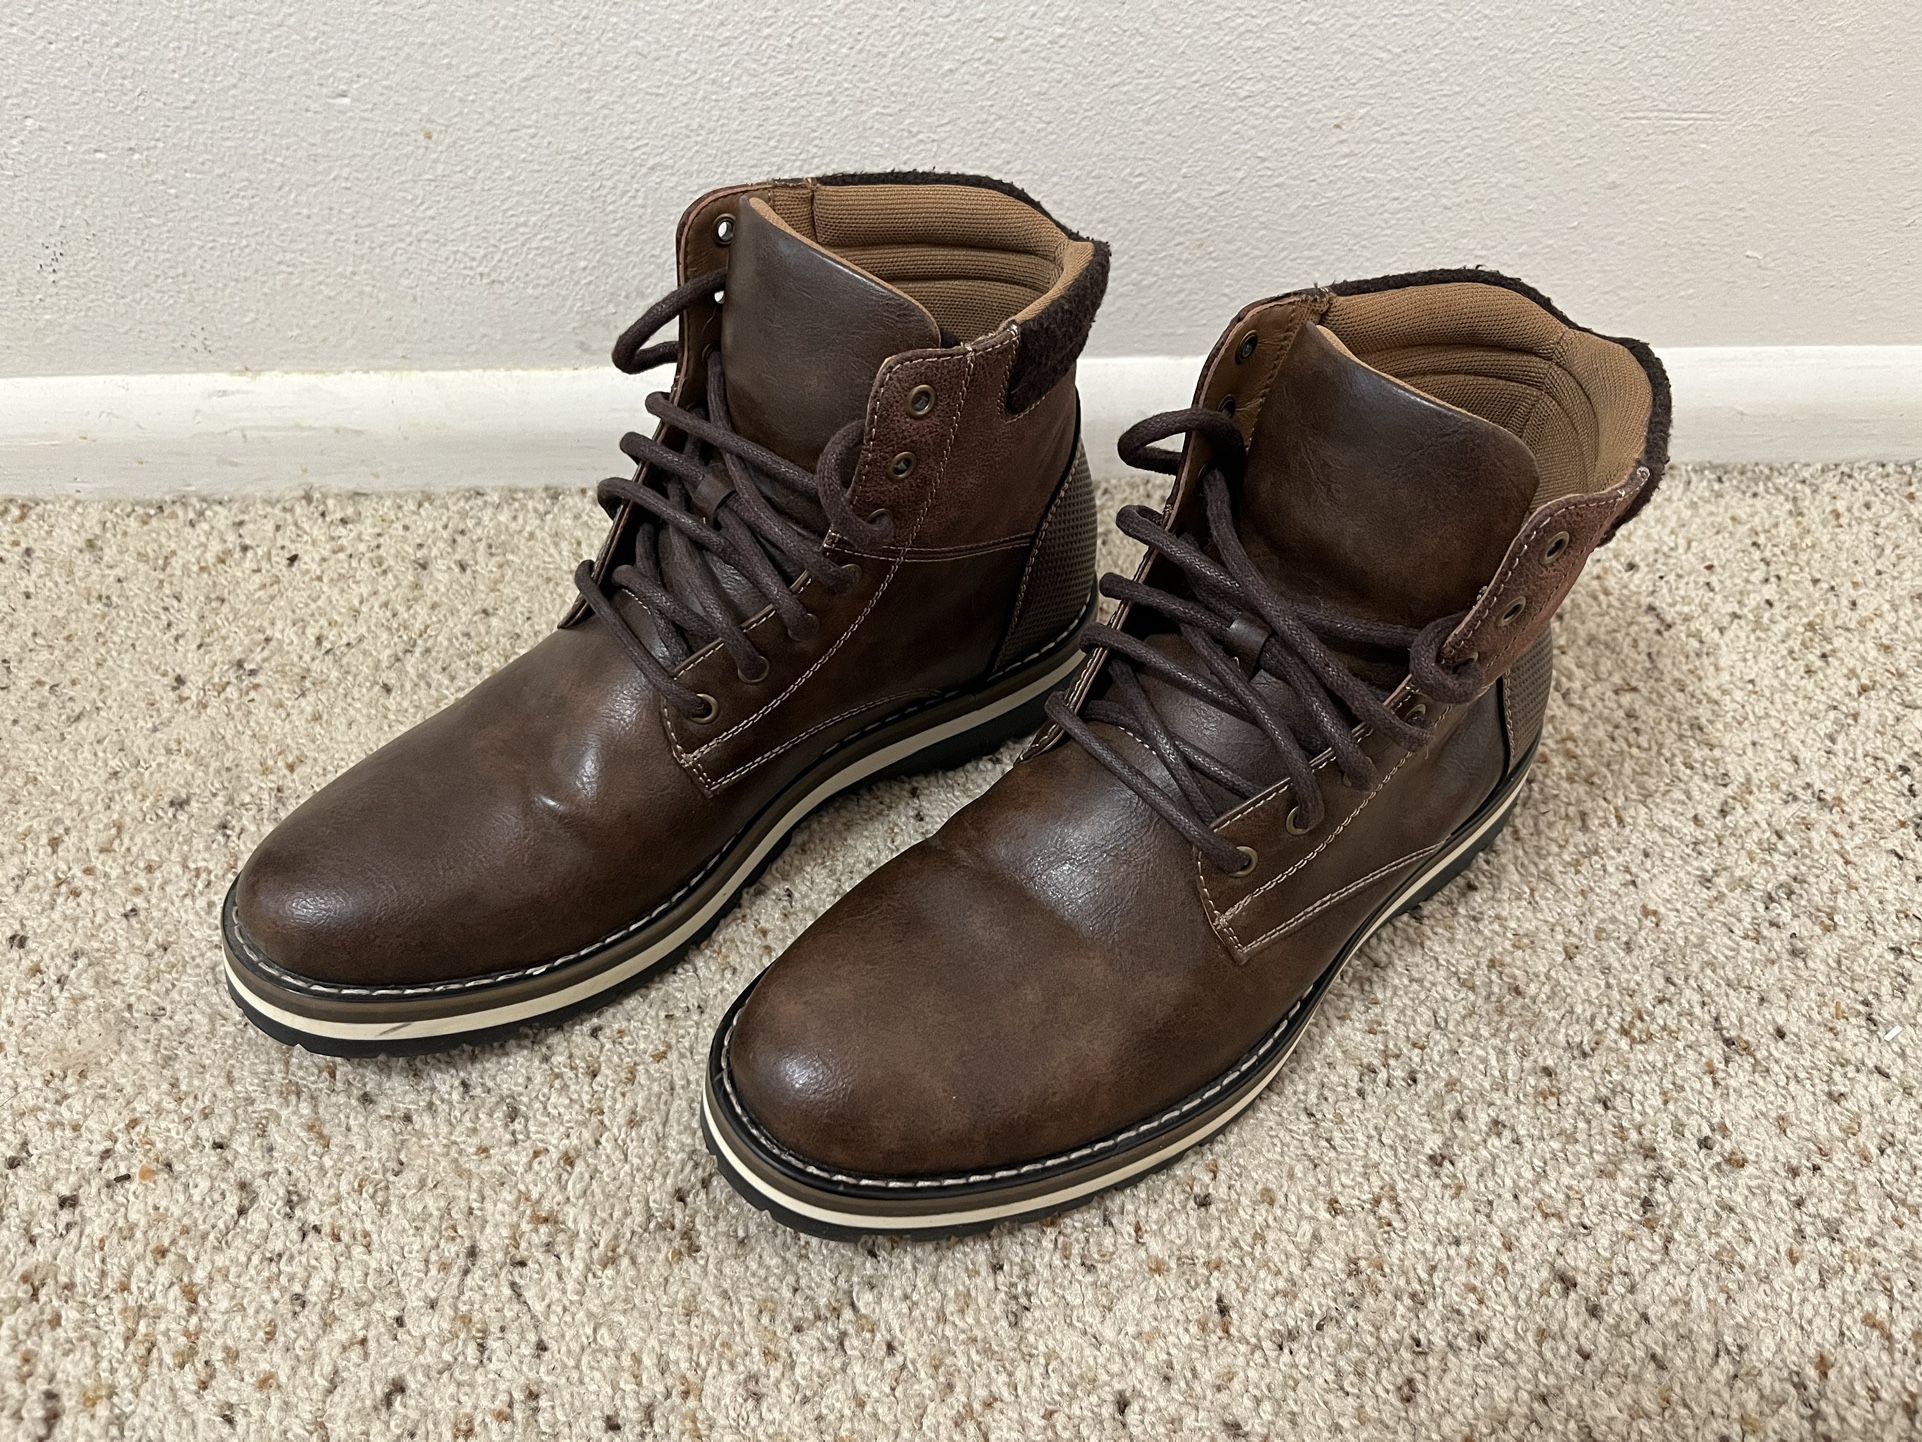 Men’s Size 9 Shoes/Boots — NEARLY BRAND NEW